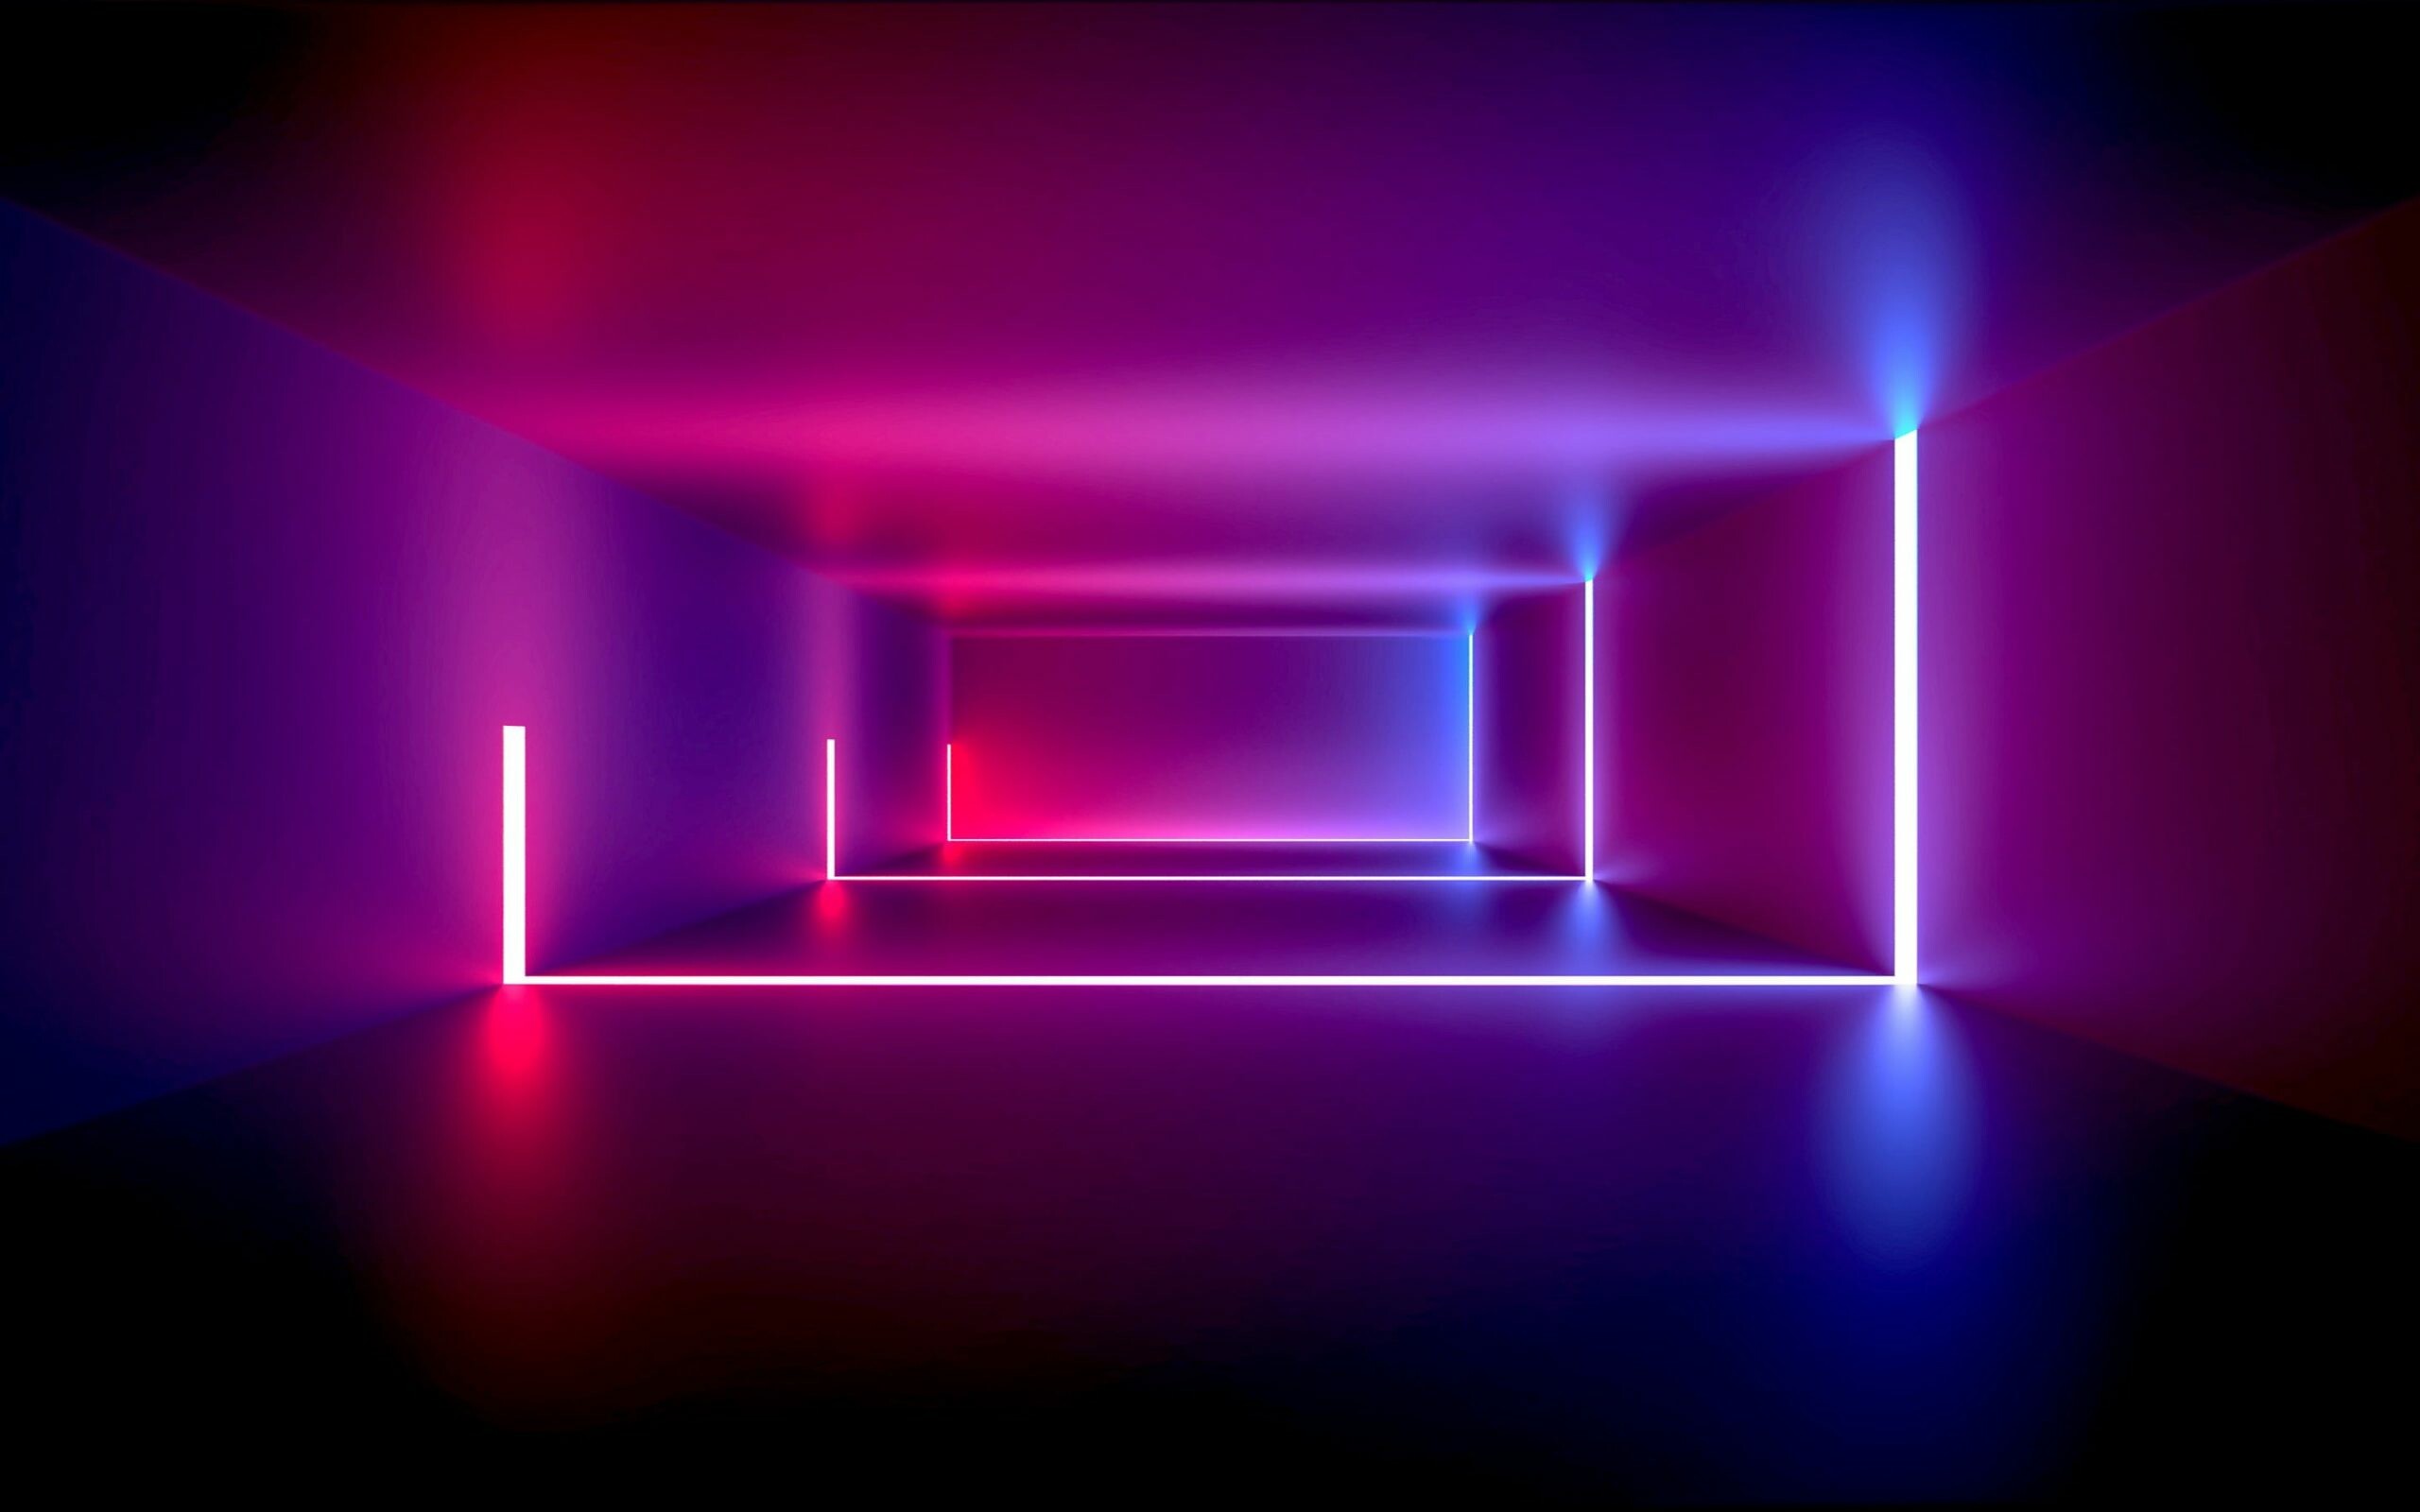 Neon: Design, Abstract, A combination of bright colors and bold shapes. 2560x1600 HD Wallpaper.